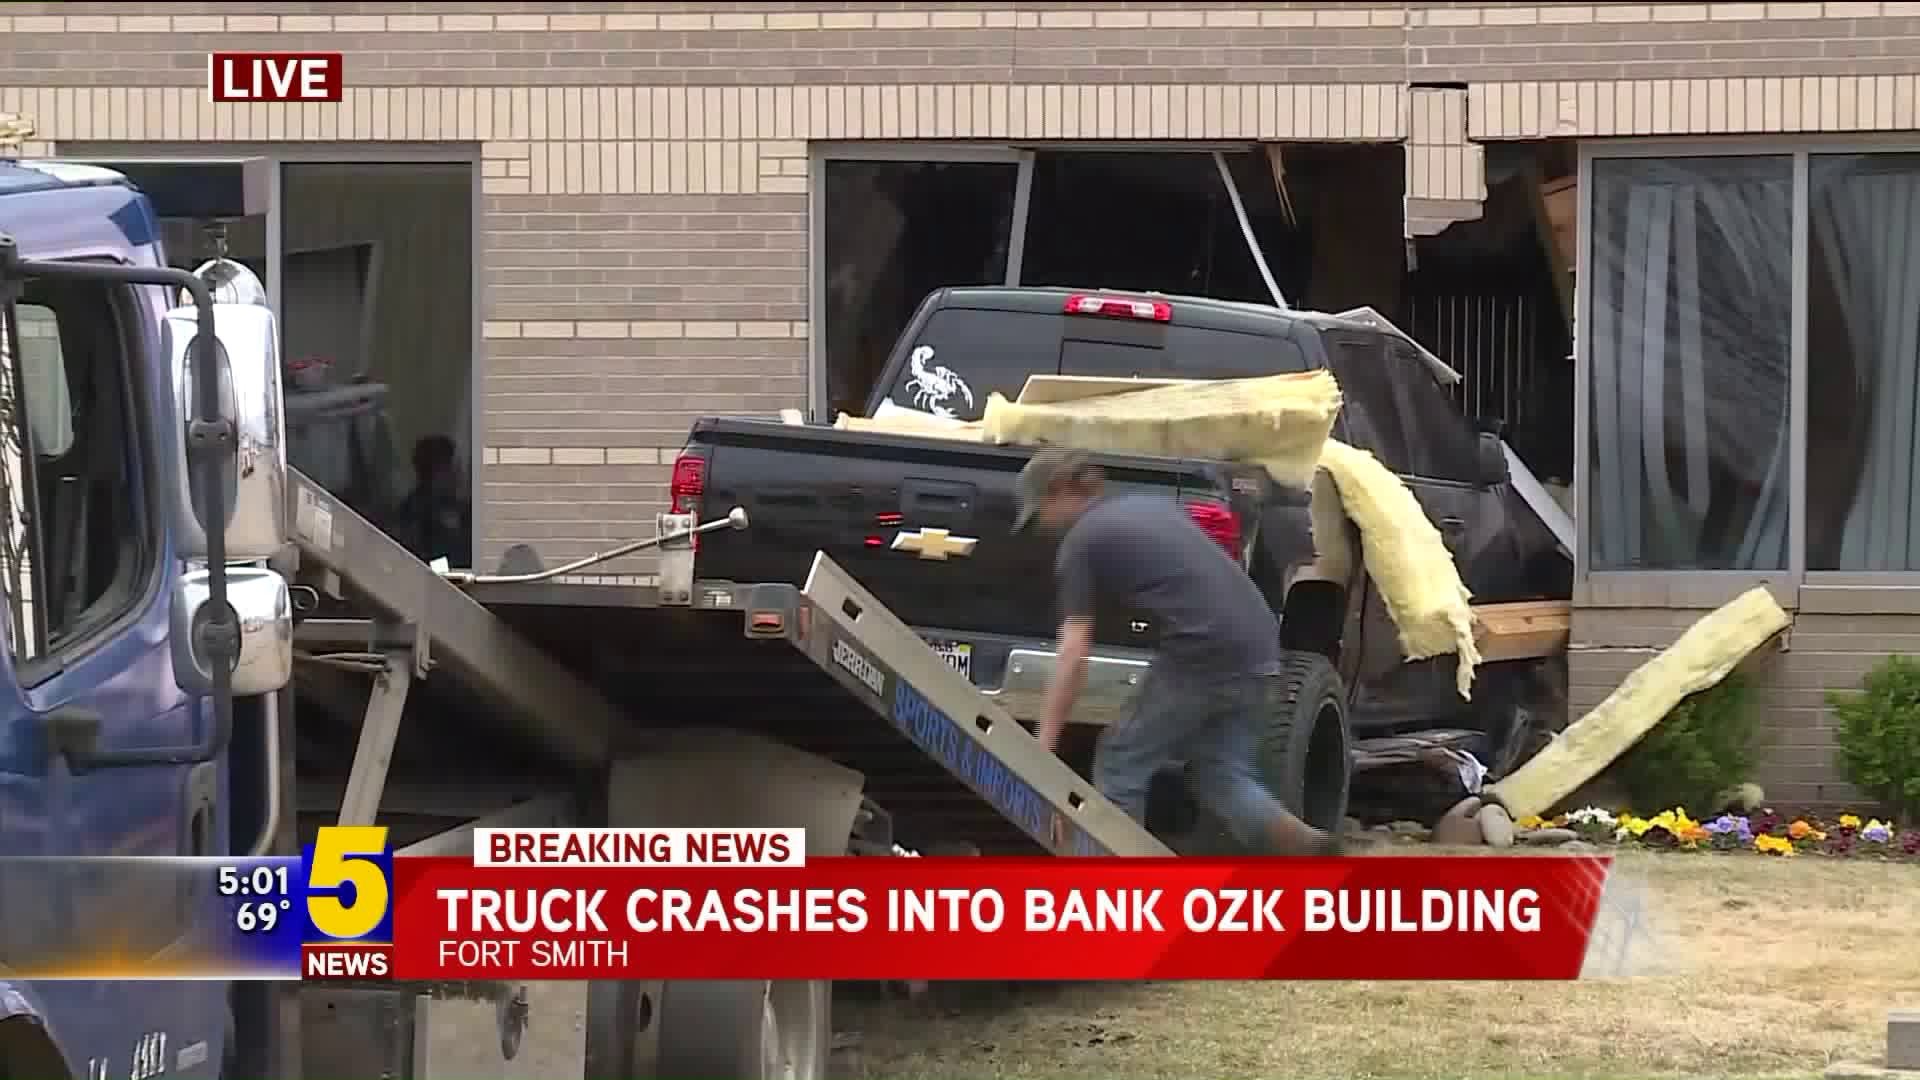 Truck Crashes Into Bank OZK in Fort Smith